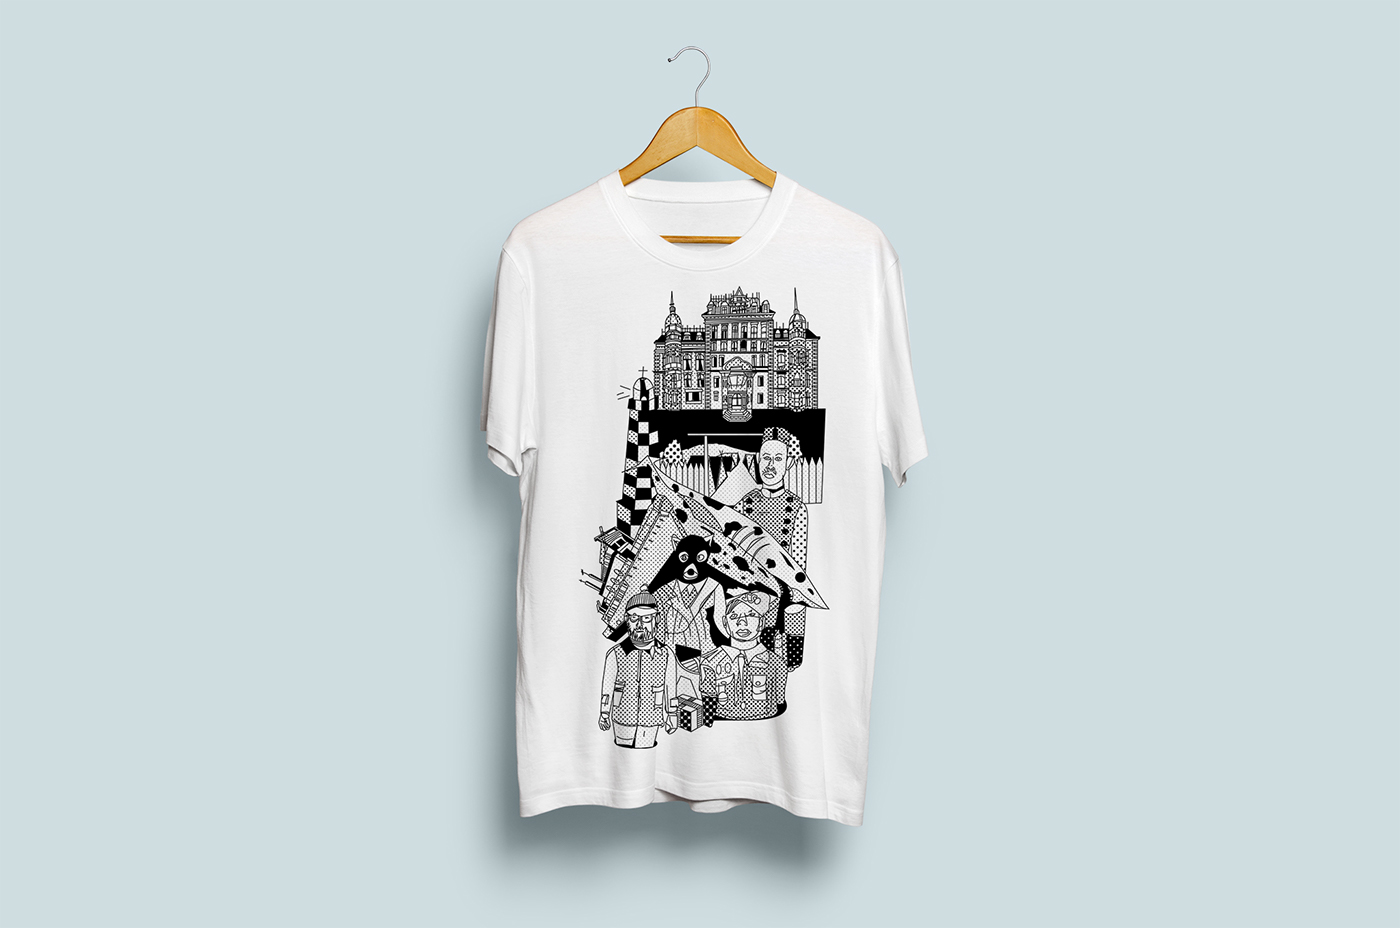 Tee-shirt dessin wes anderson